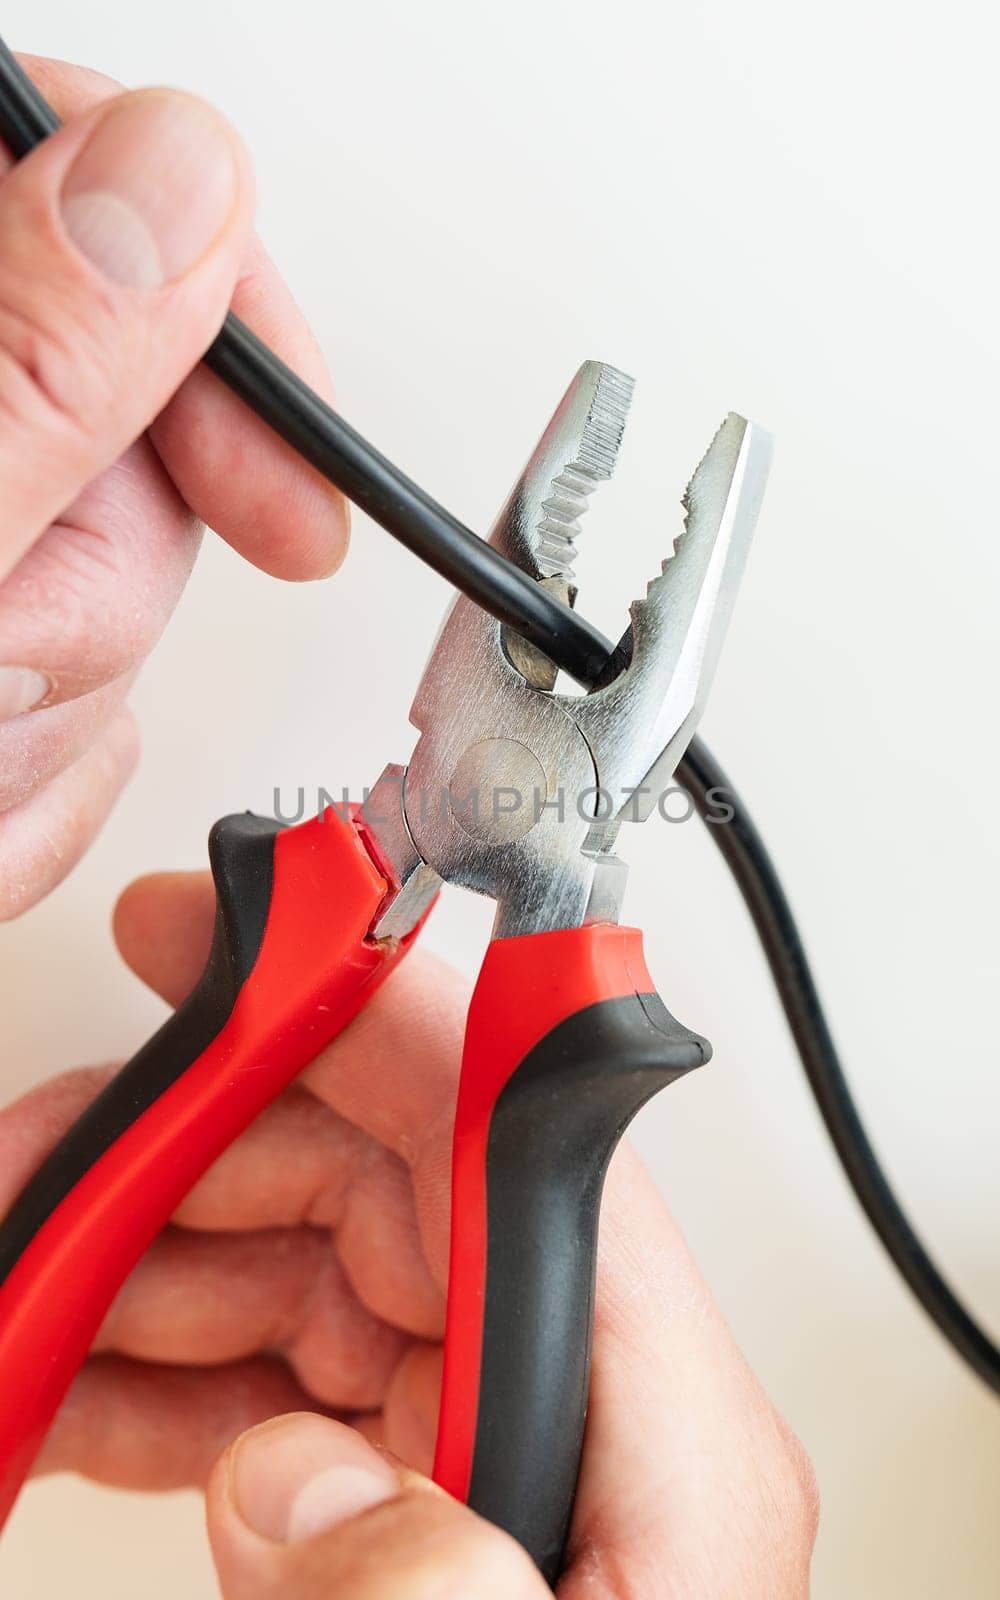 Close-up of hands using pliers to cut a black wire, highlighting a DIY electrical repair task. by sfinks